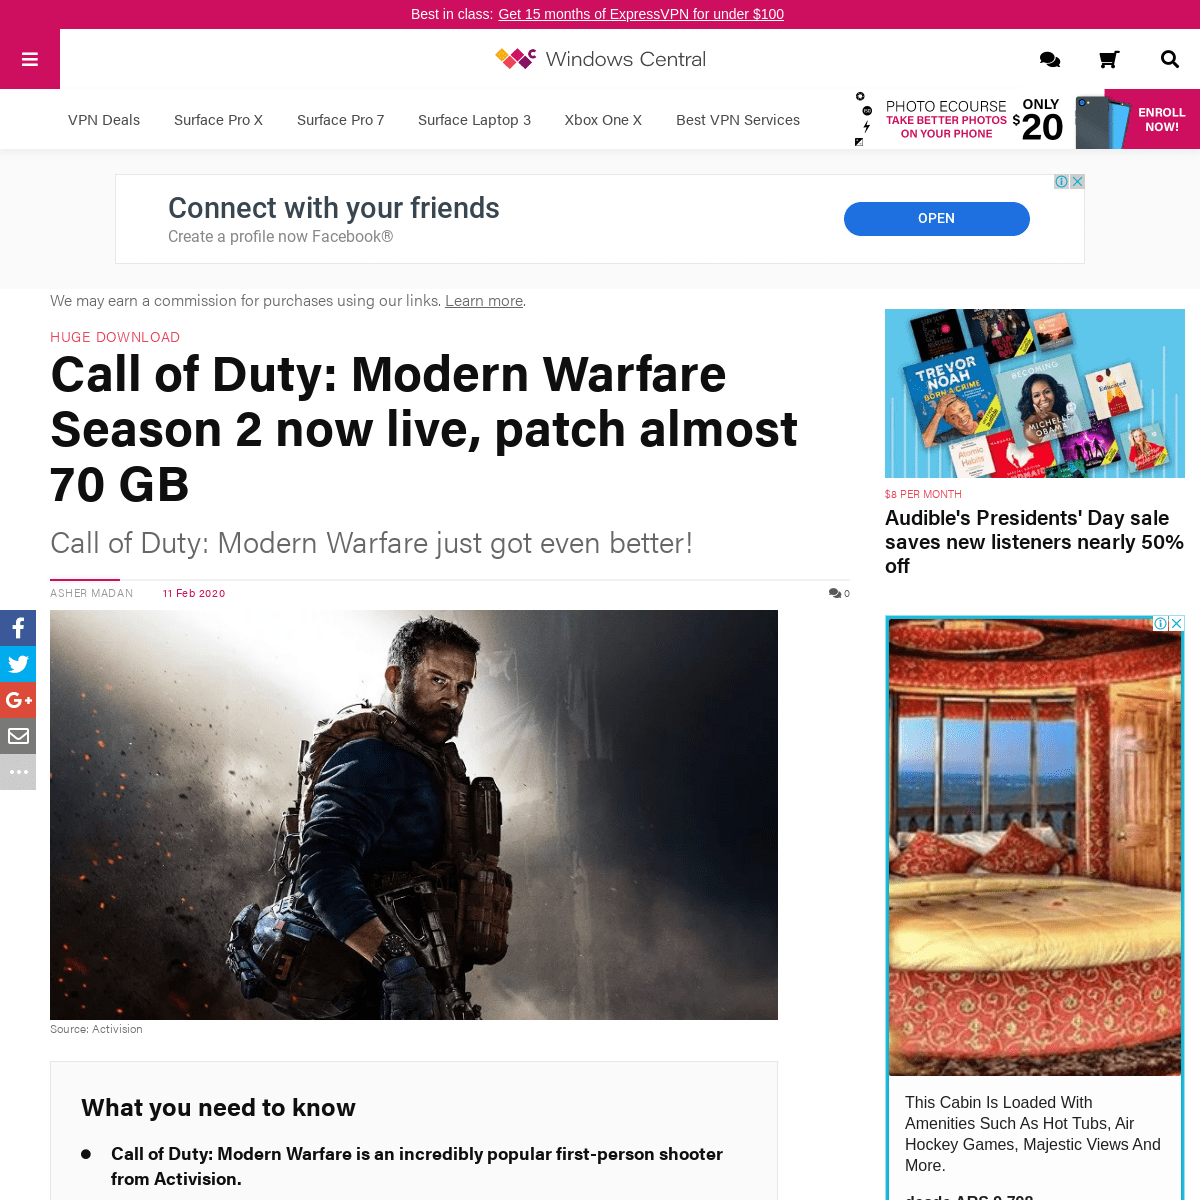 A complete backup of www.windowscentral.com/call-duty-modern-warfare-season-2-now-live-patch-almost-70-gb